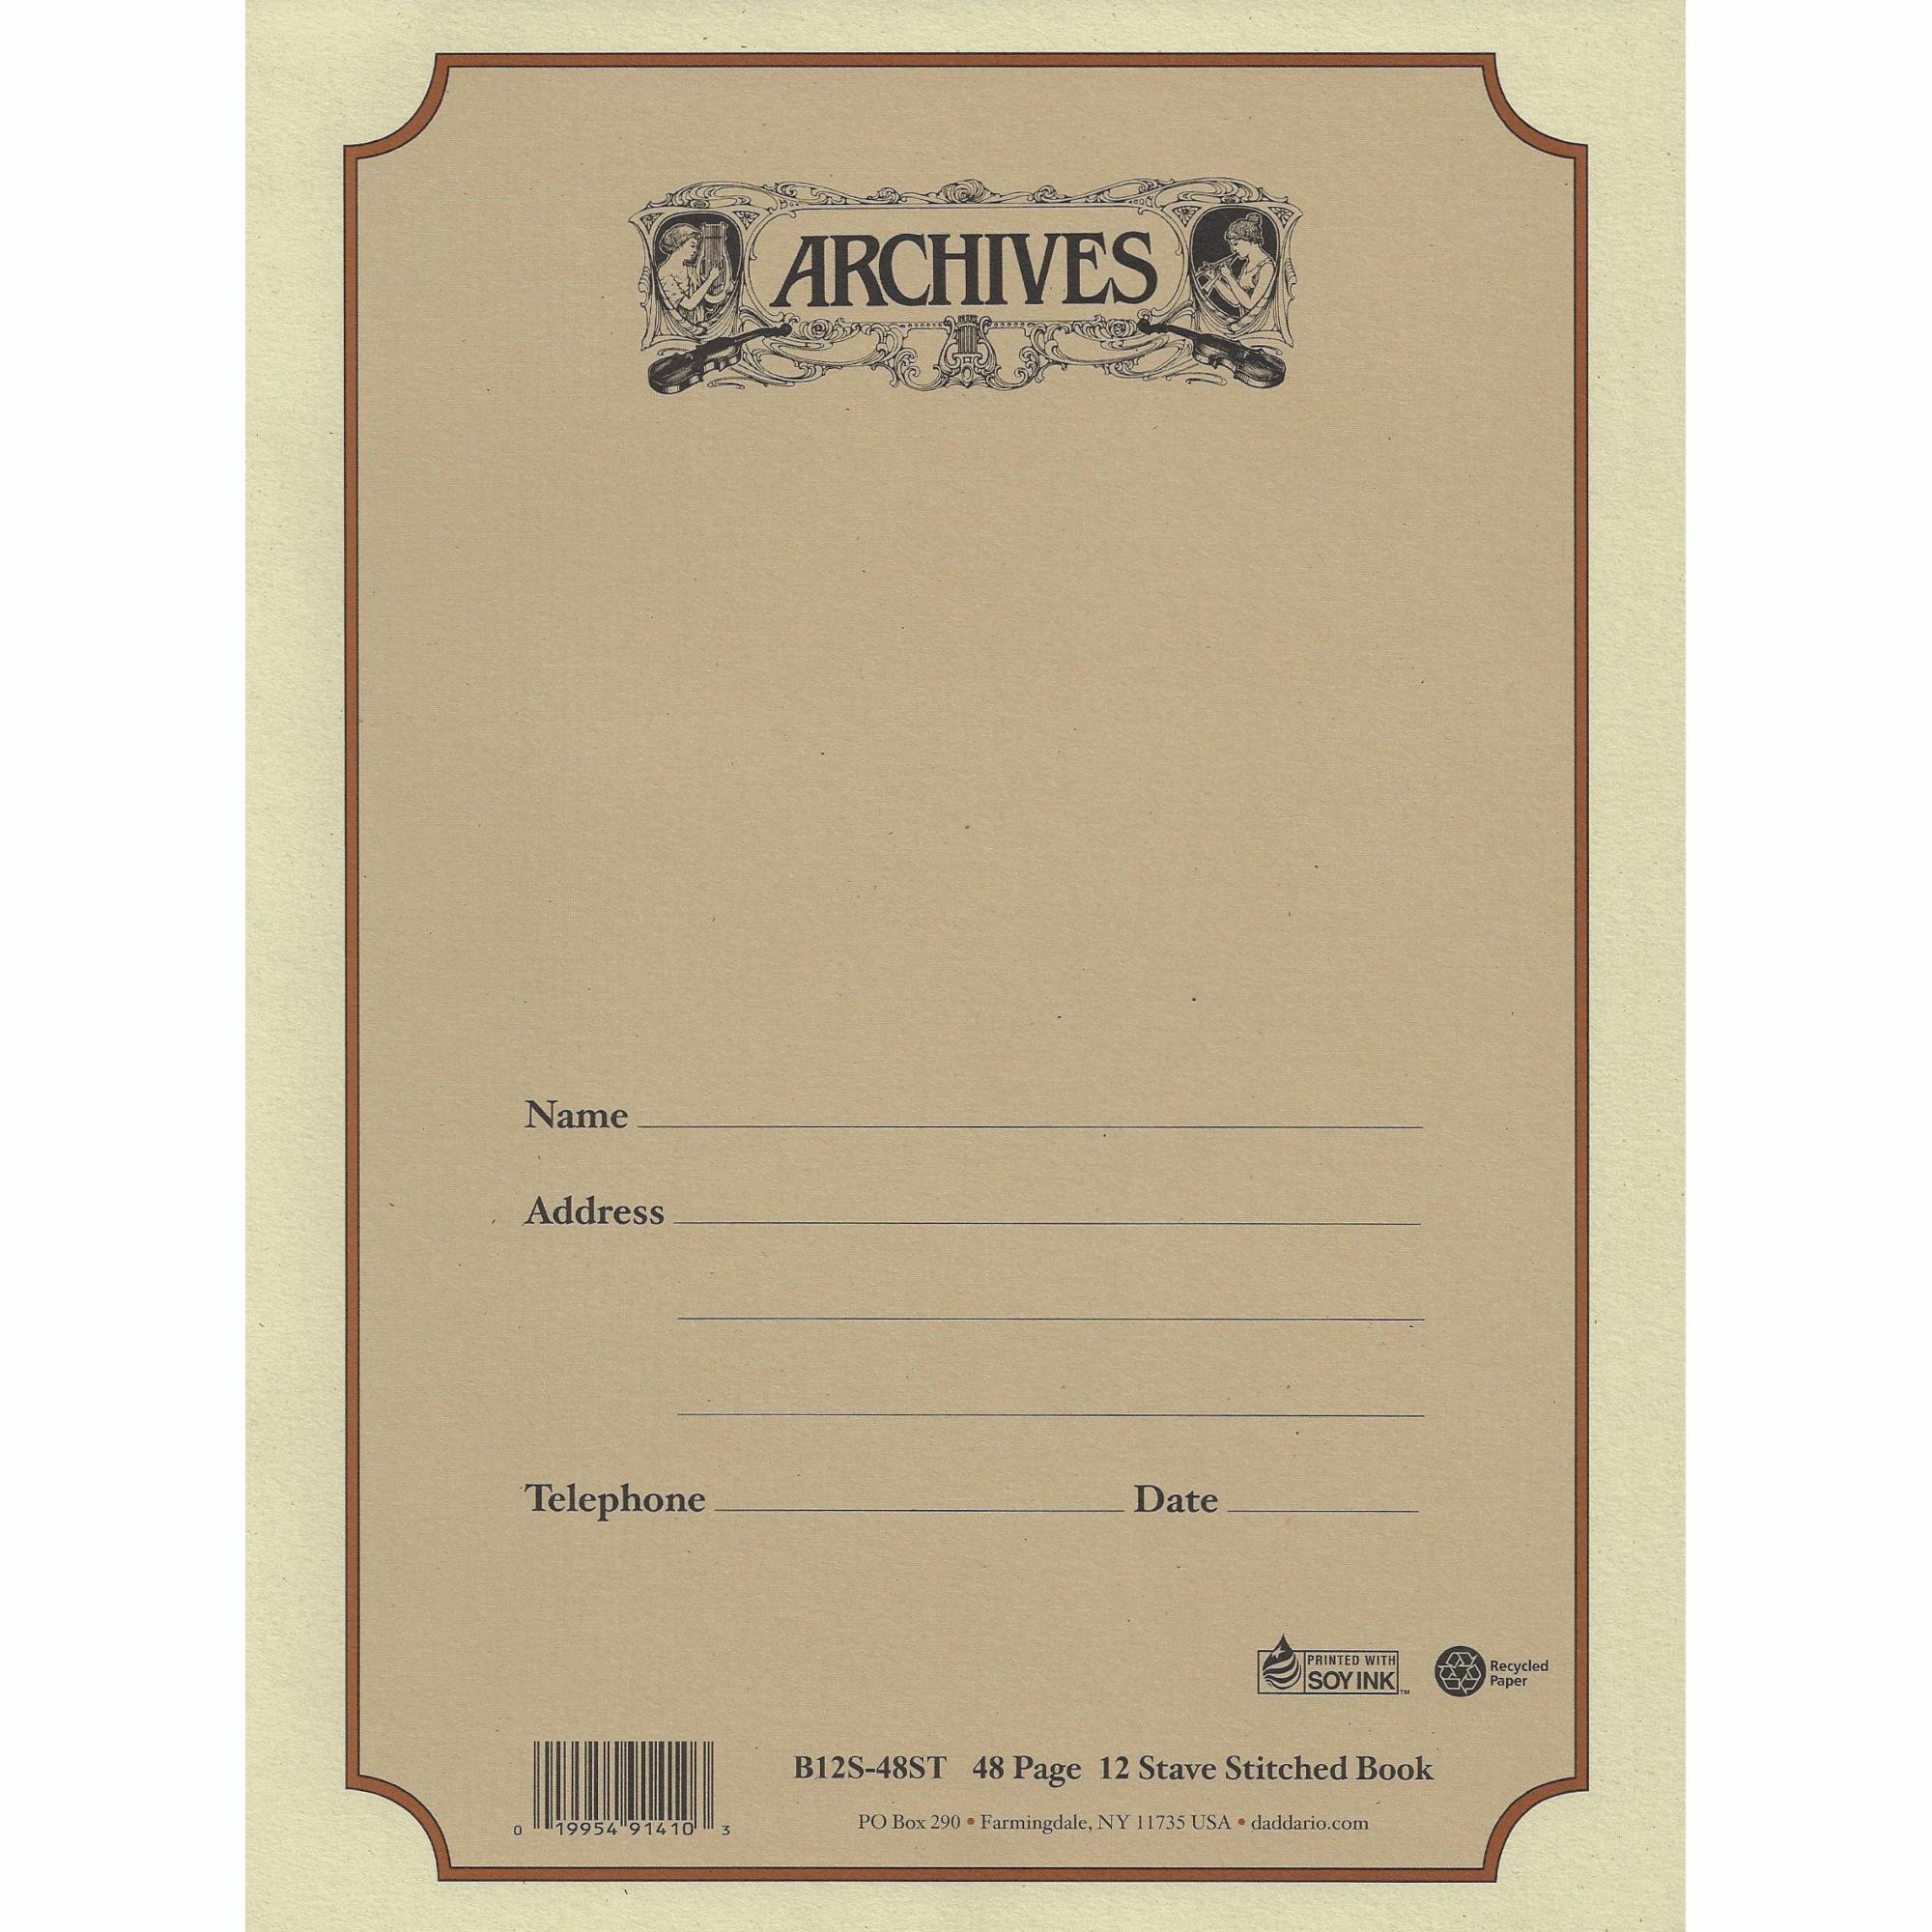 Archives Stitched Book Manuscript Paper (48 Pages, 12 Staves)